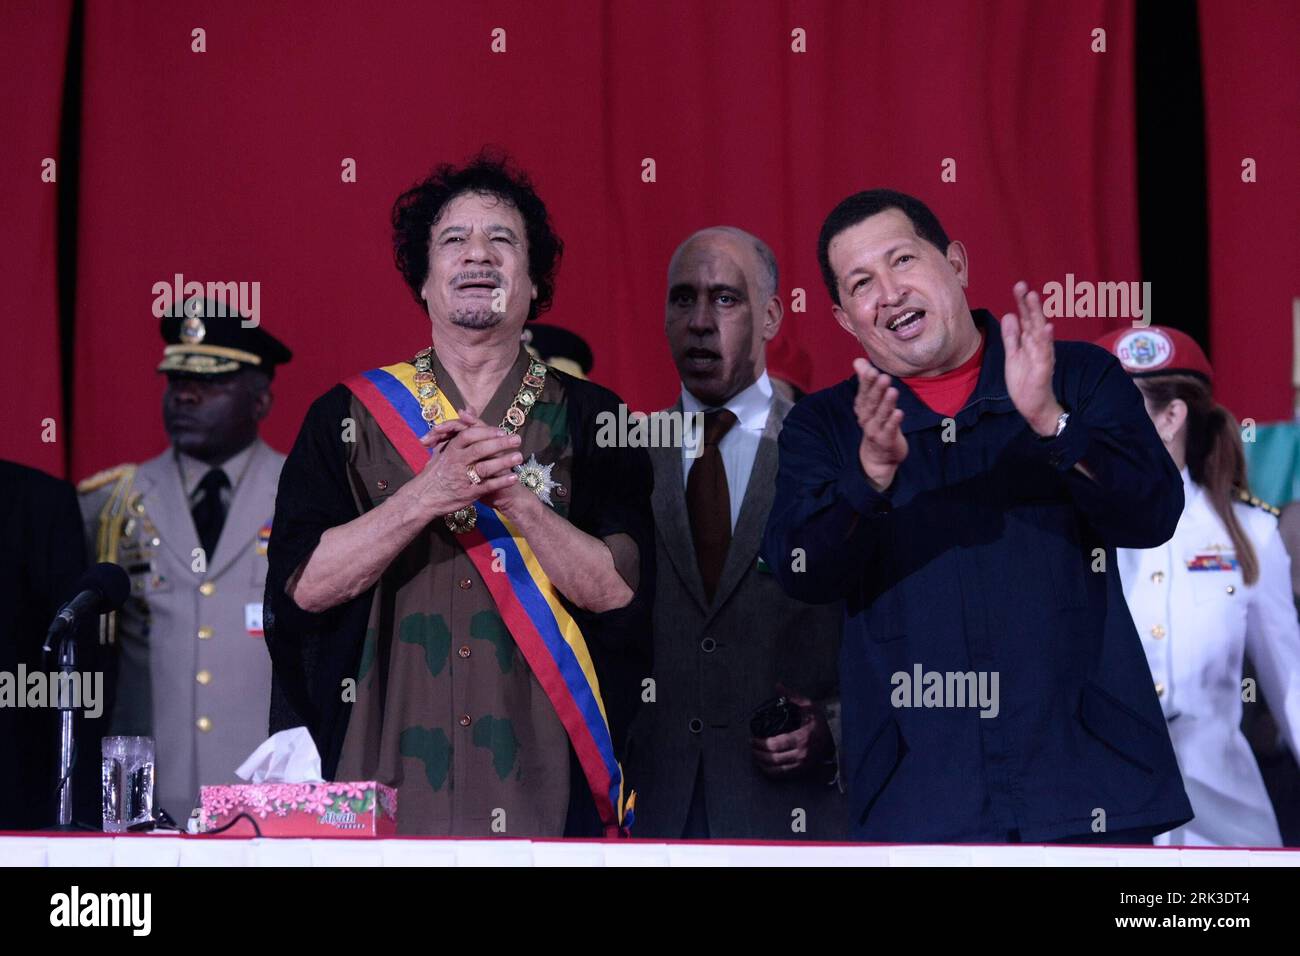 Bildnummer: 53456098  Datum: 28.09.2009  Copyright: imago/Xinhua (090929) -- MARGARITA, Sep. 29, 2009 (Xinhua) -- Libyan leader Moammar al-Gaddafi (L, front), is decorated with the Order of the Liberator, Venezuela s highest honour, by Venezuelan President Hugo Chavez (R, front) in Margarita Island, Venezuela, Sept. 28, 2009. The two sides signed a joint declaration on Monday to further political, economic and energy cooperation. (Xinhua/Bolivar News Agency) (ypf) (4)VENEZUELA-LIBYA-CHAVEZ-KADHAFI-COOPERATION PUBLICATIONxNOTxINxCHN People Politik kbdig xcb 2009 quer    Bildnummer 53456098 Date Stock Photo